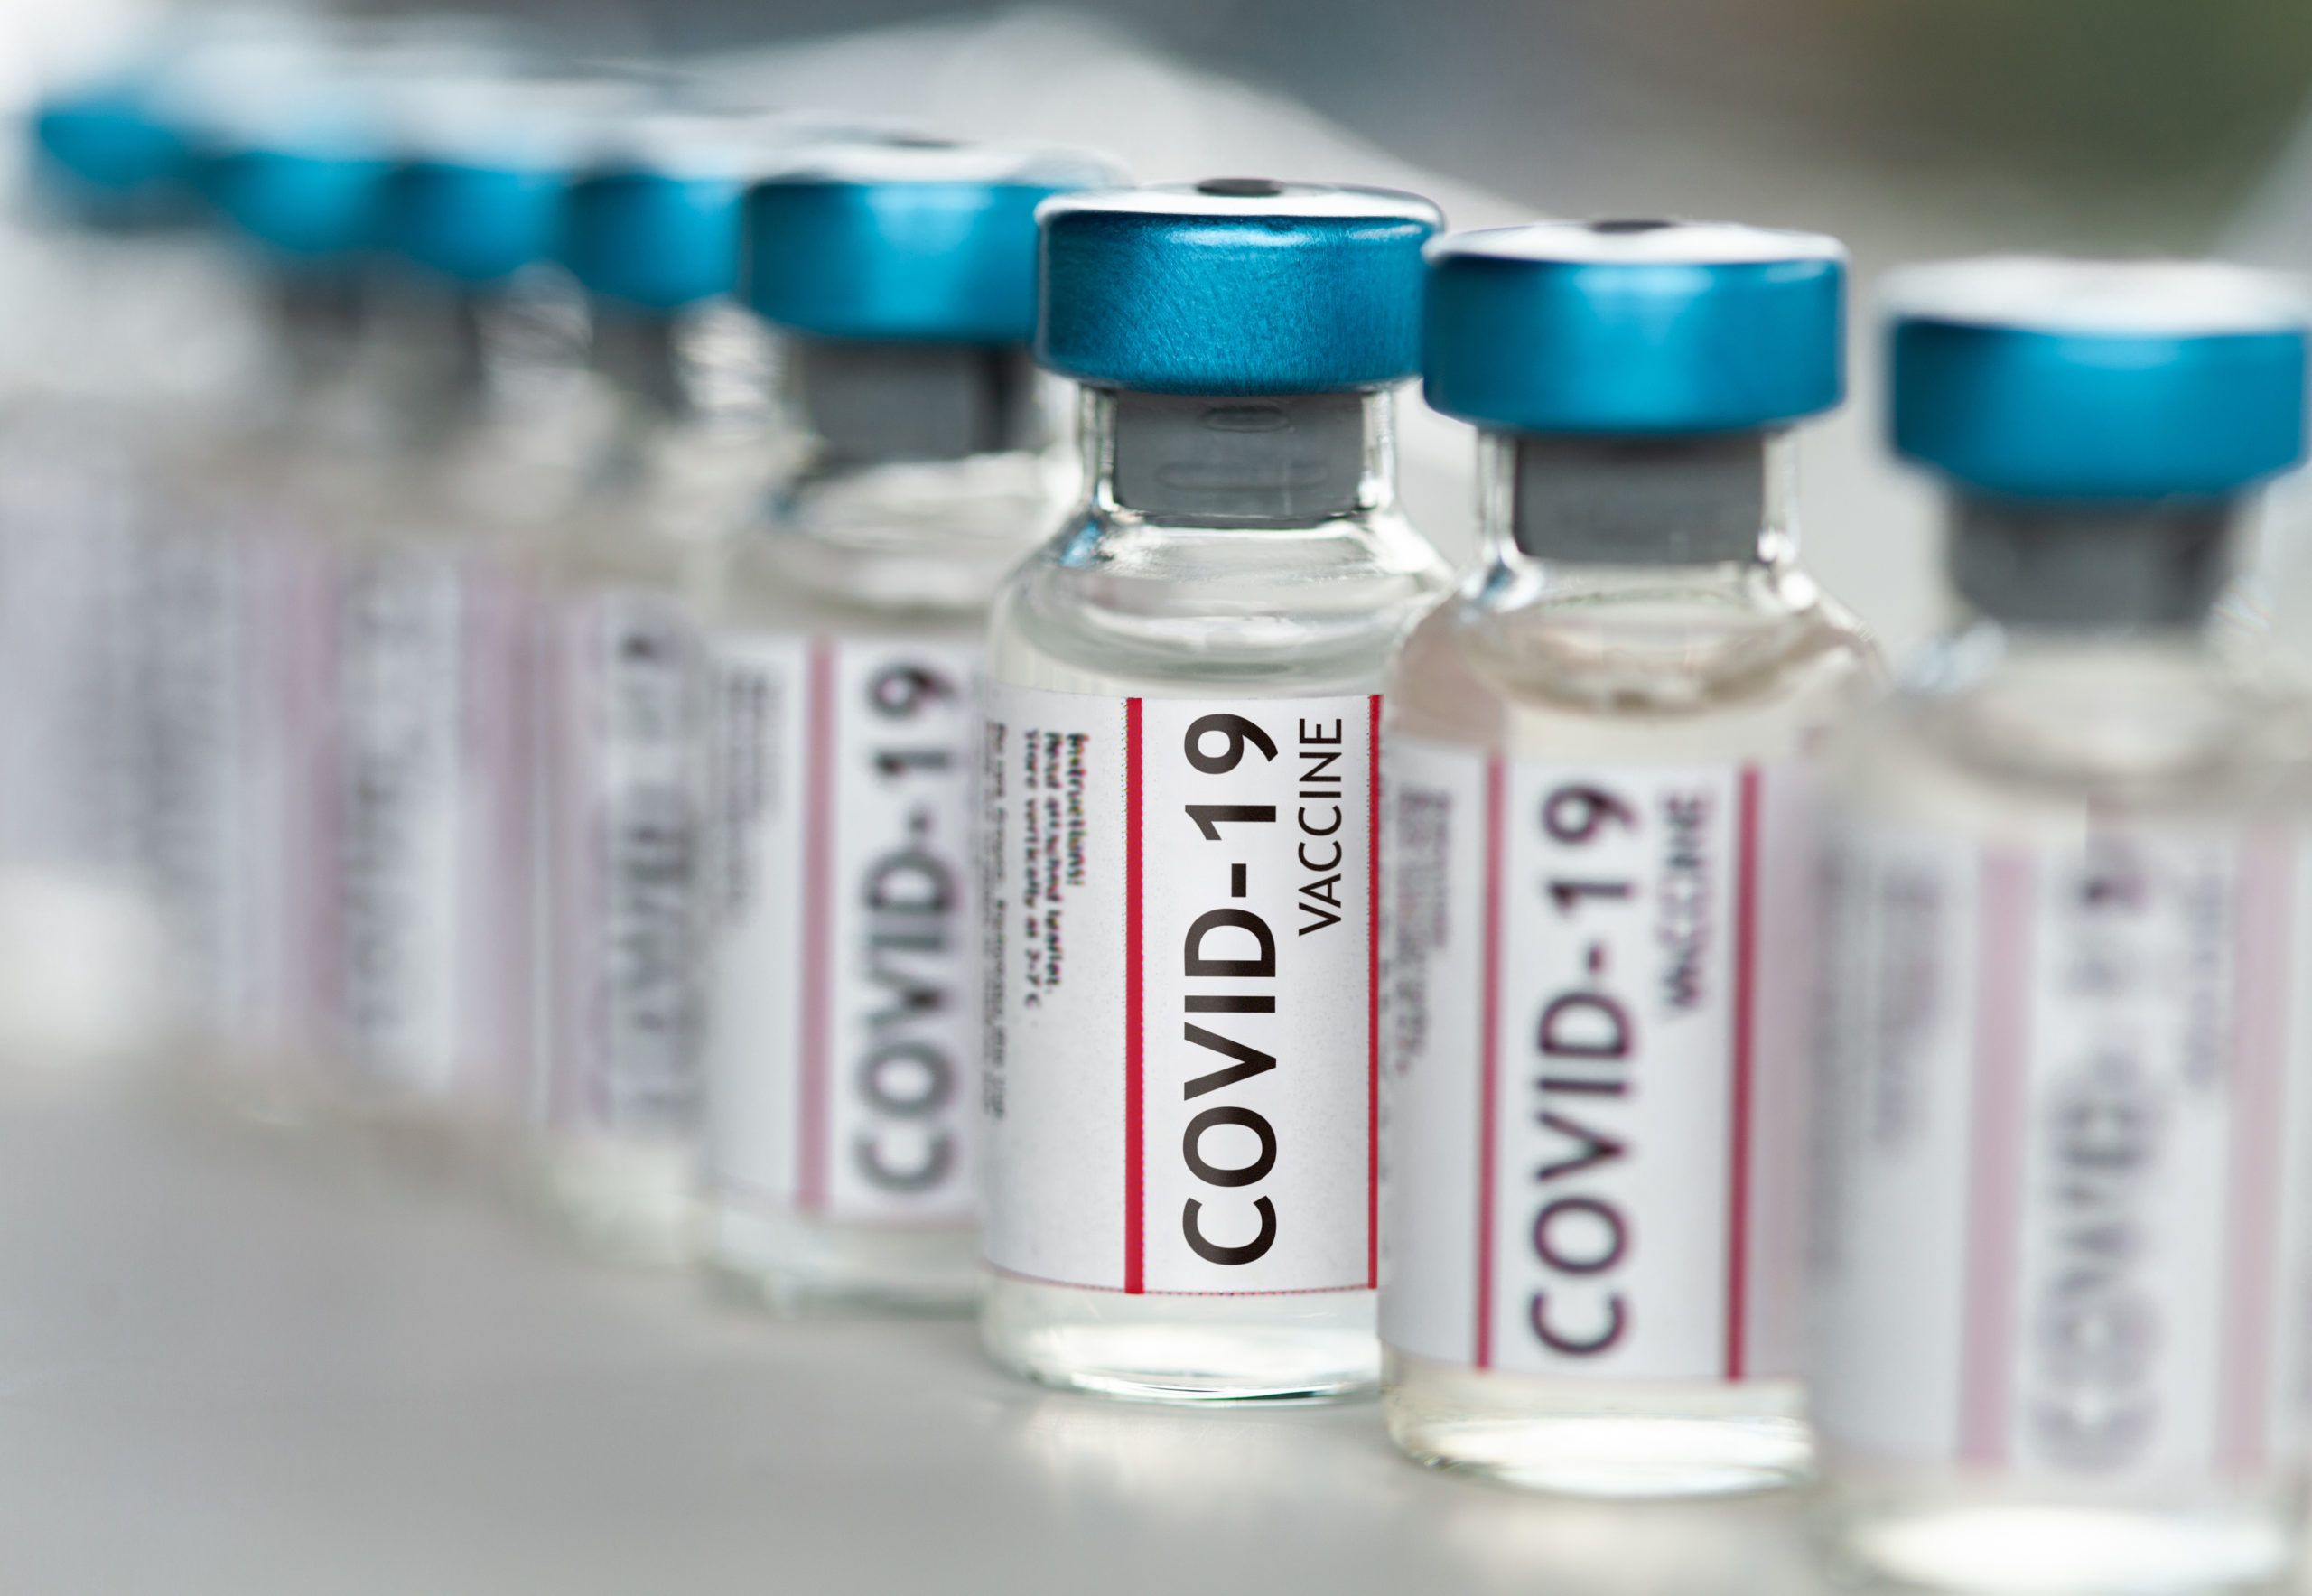 Mandate or not? The question vexing employers over COVID19 vaccine